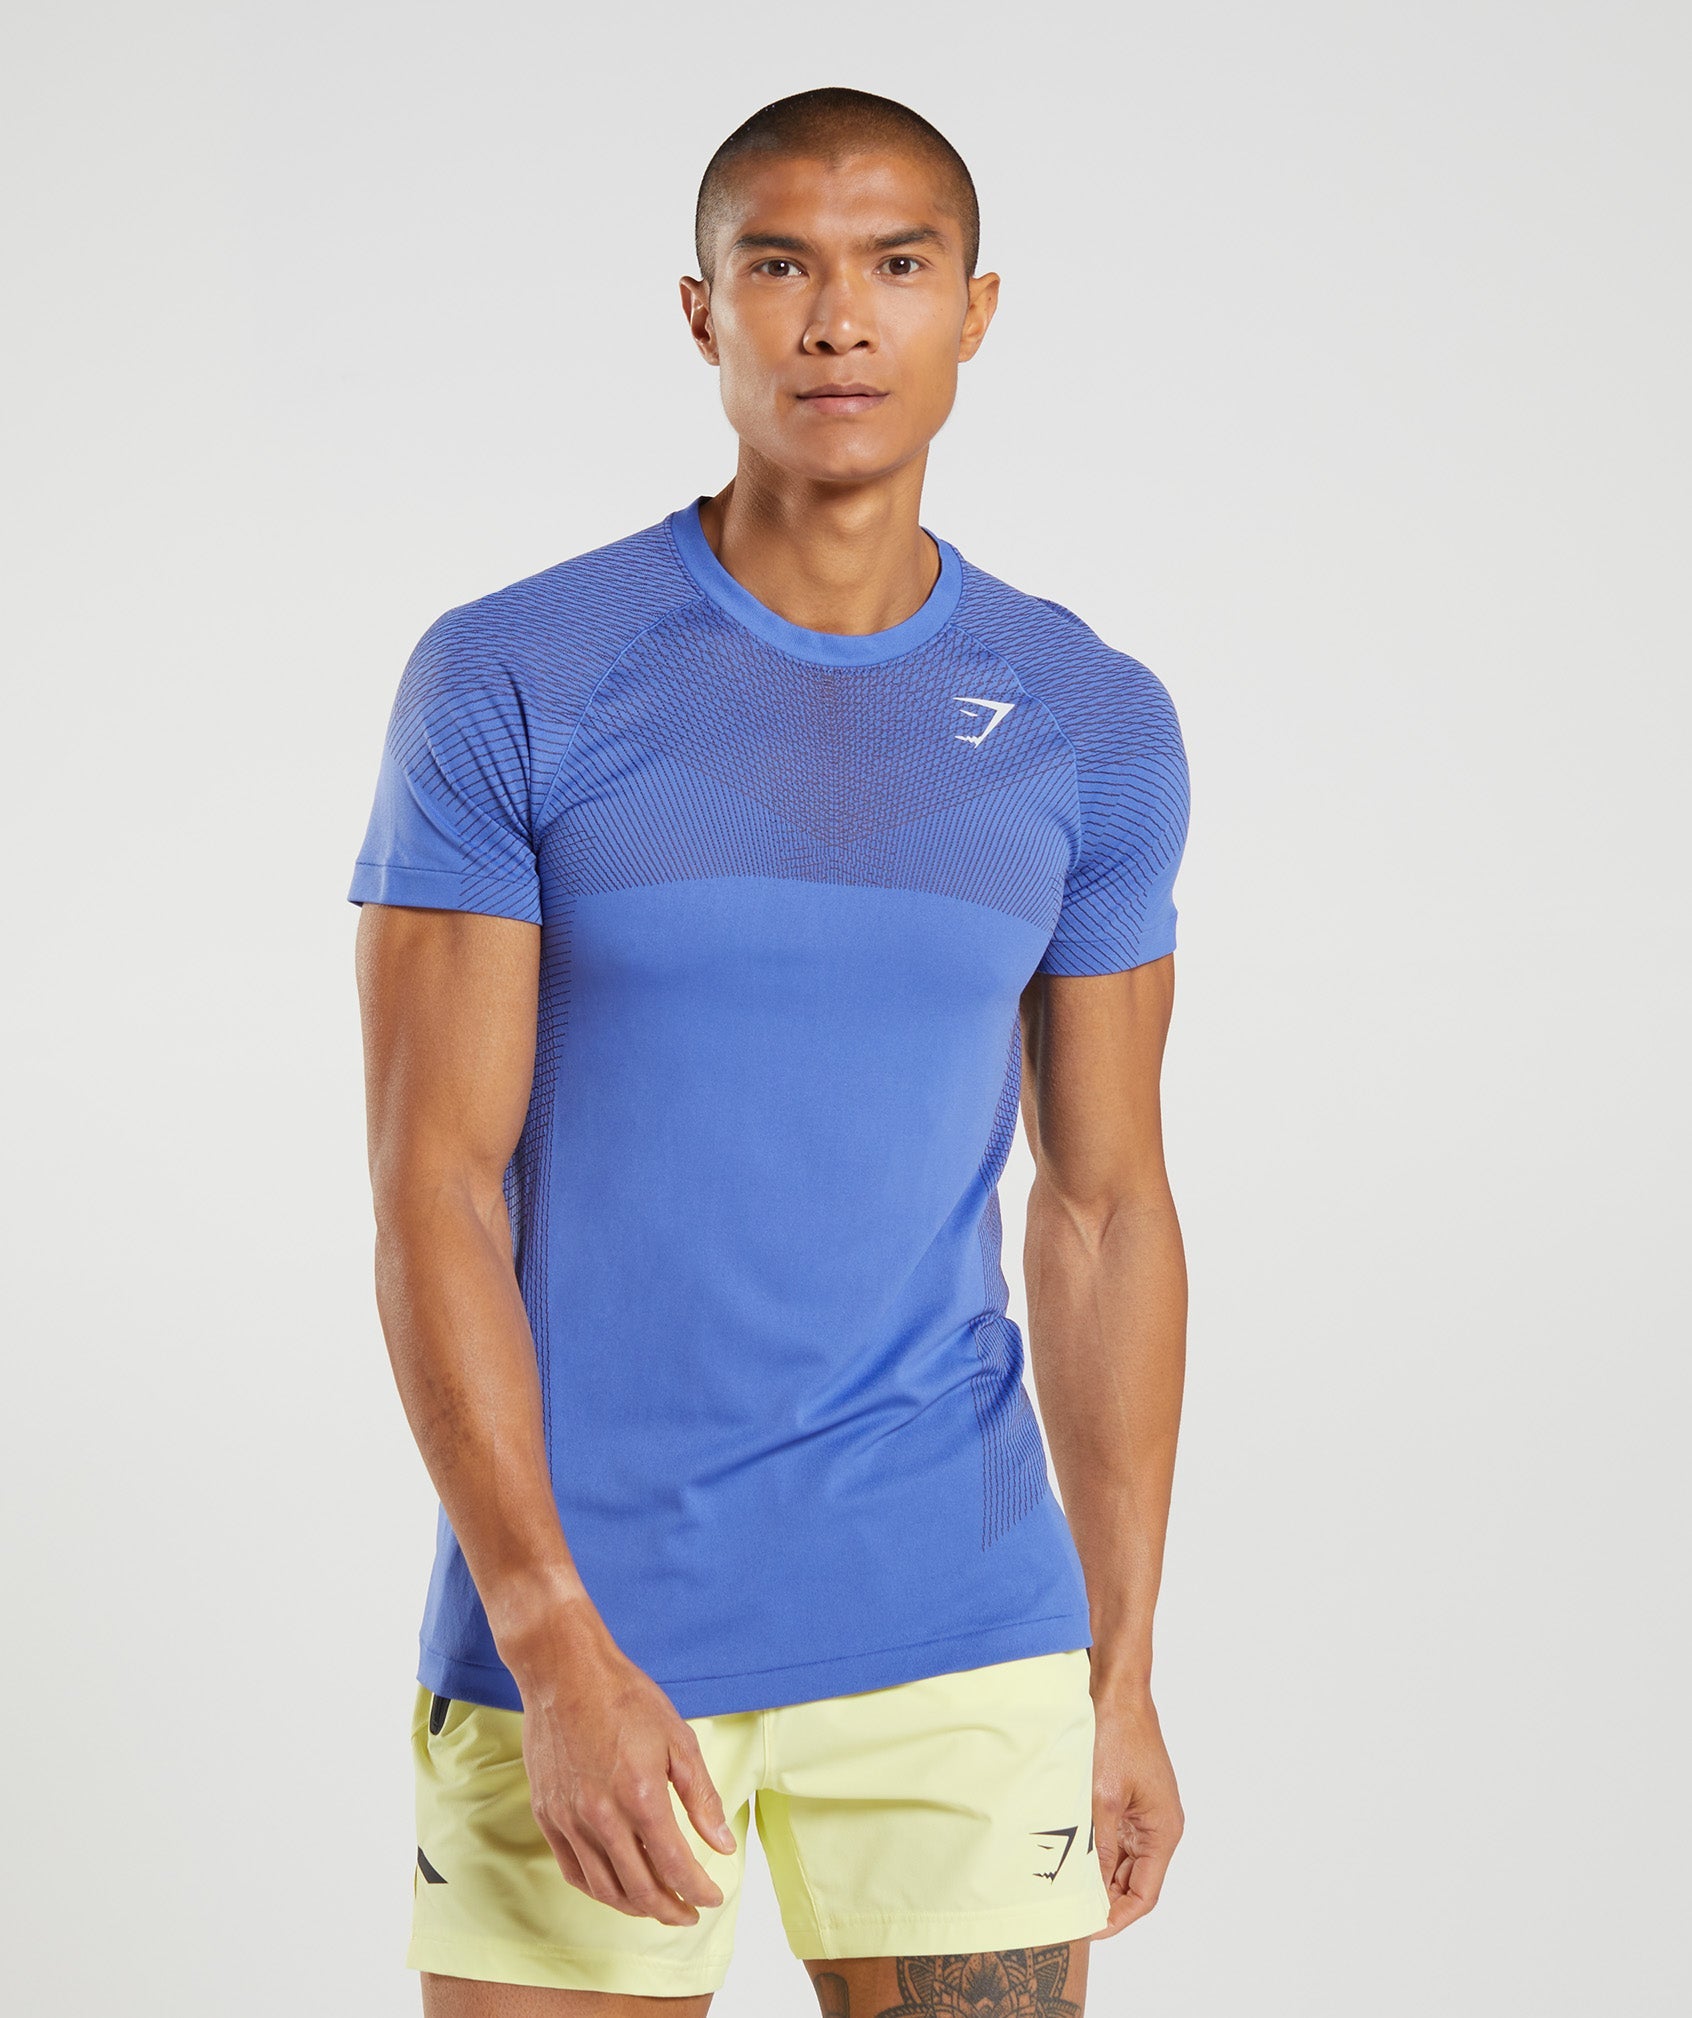 Apex Seamless T-Shirt in Court Blue/Onyx Grey - view 1